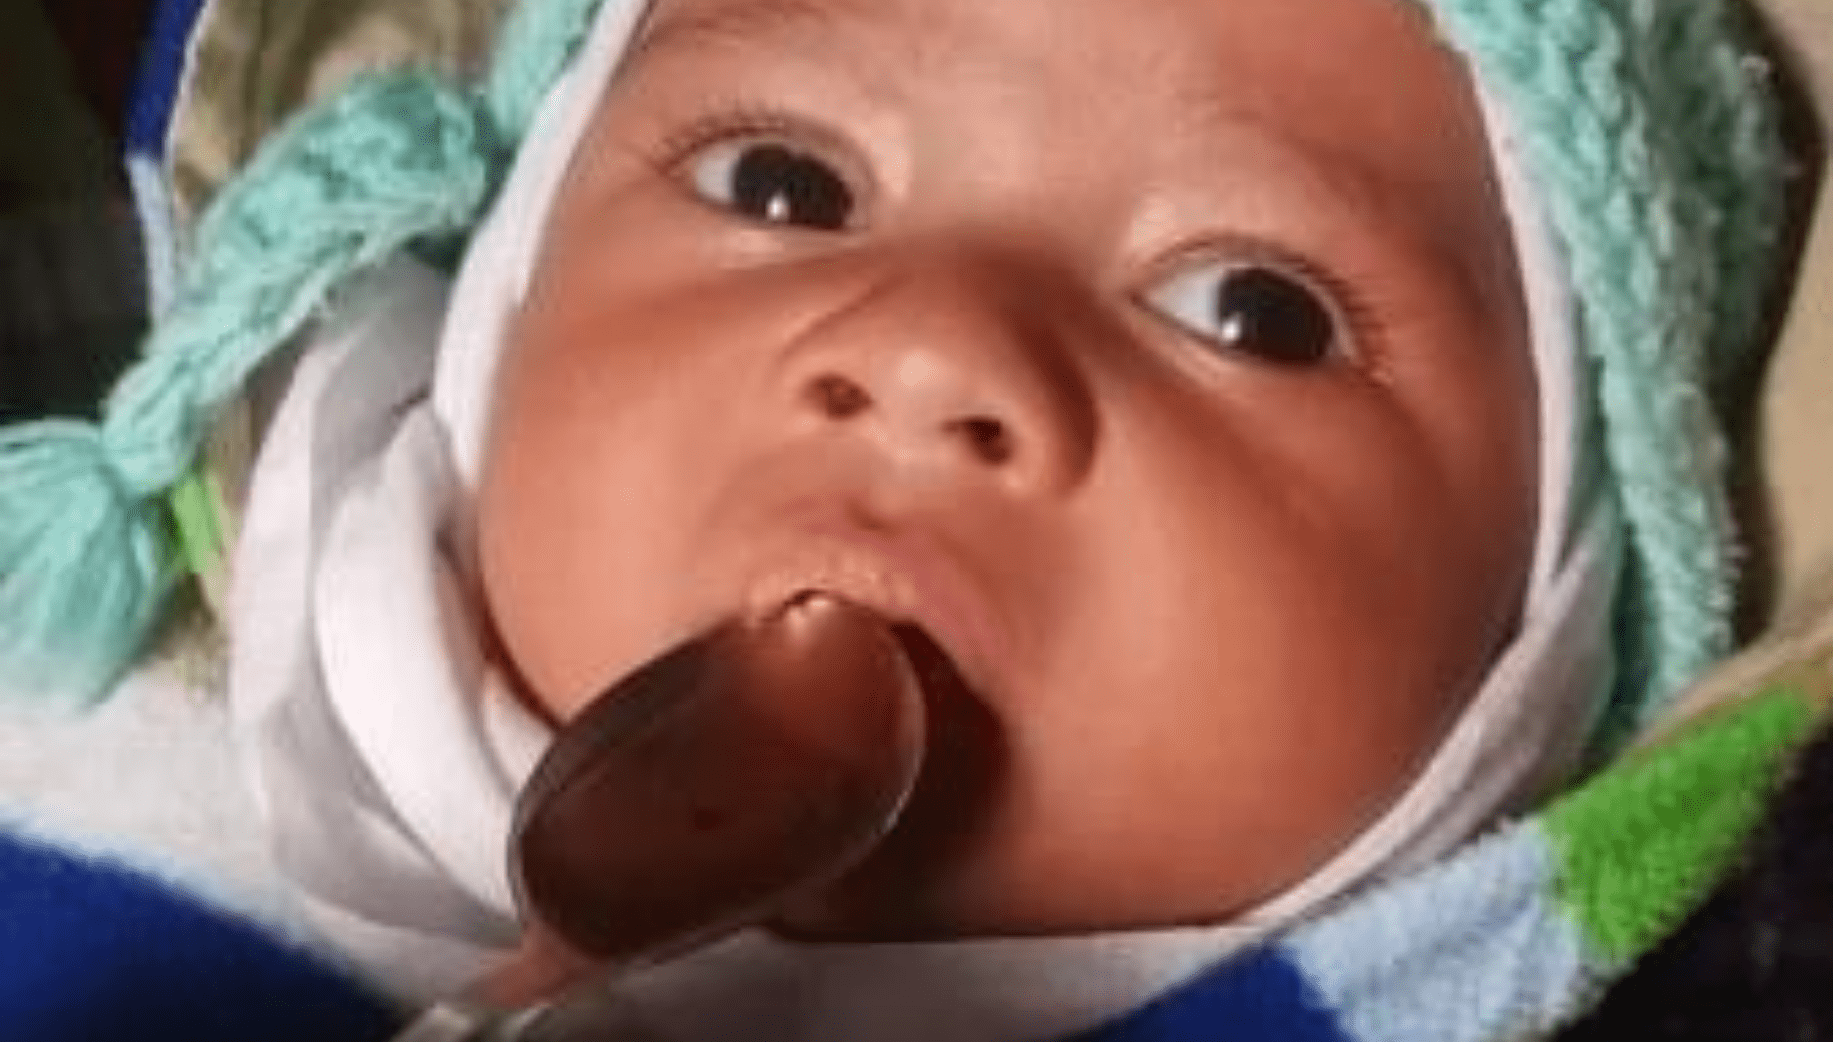 Baby being given traditional medicine in Meghalaya